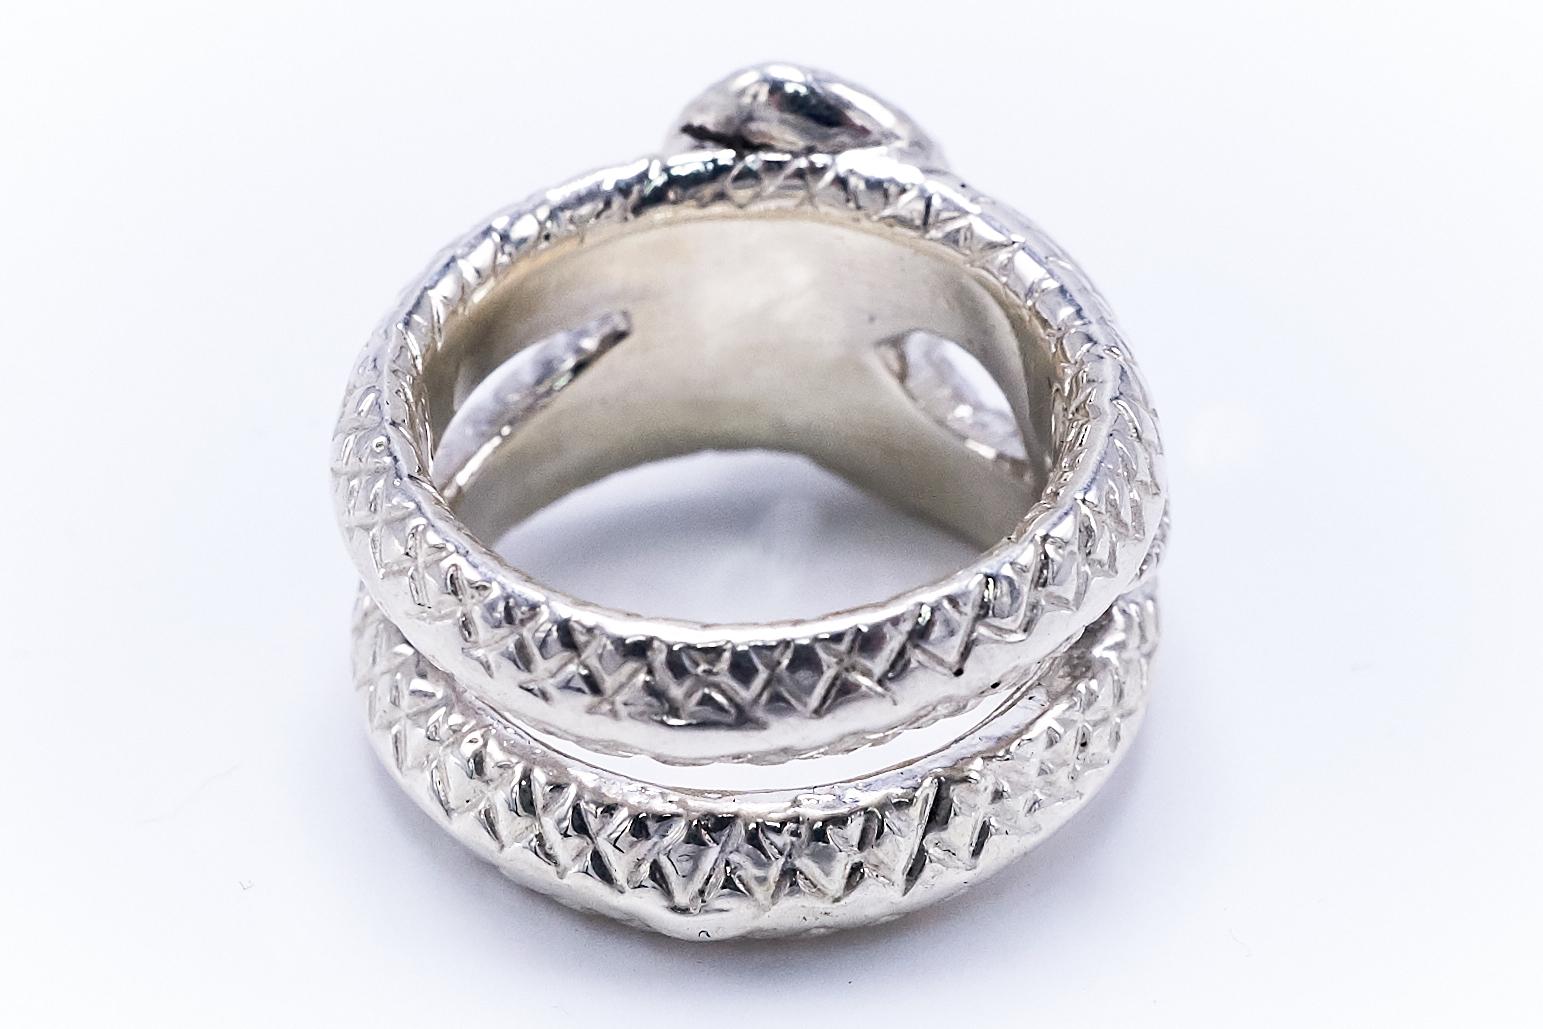 Snake Ring Sterling Silver White Diamond Victorian Style J Dauphin

J DAUPHIN 